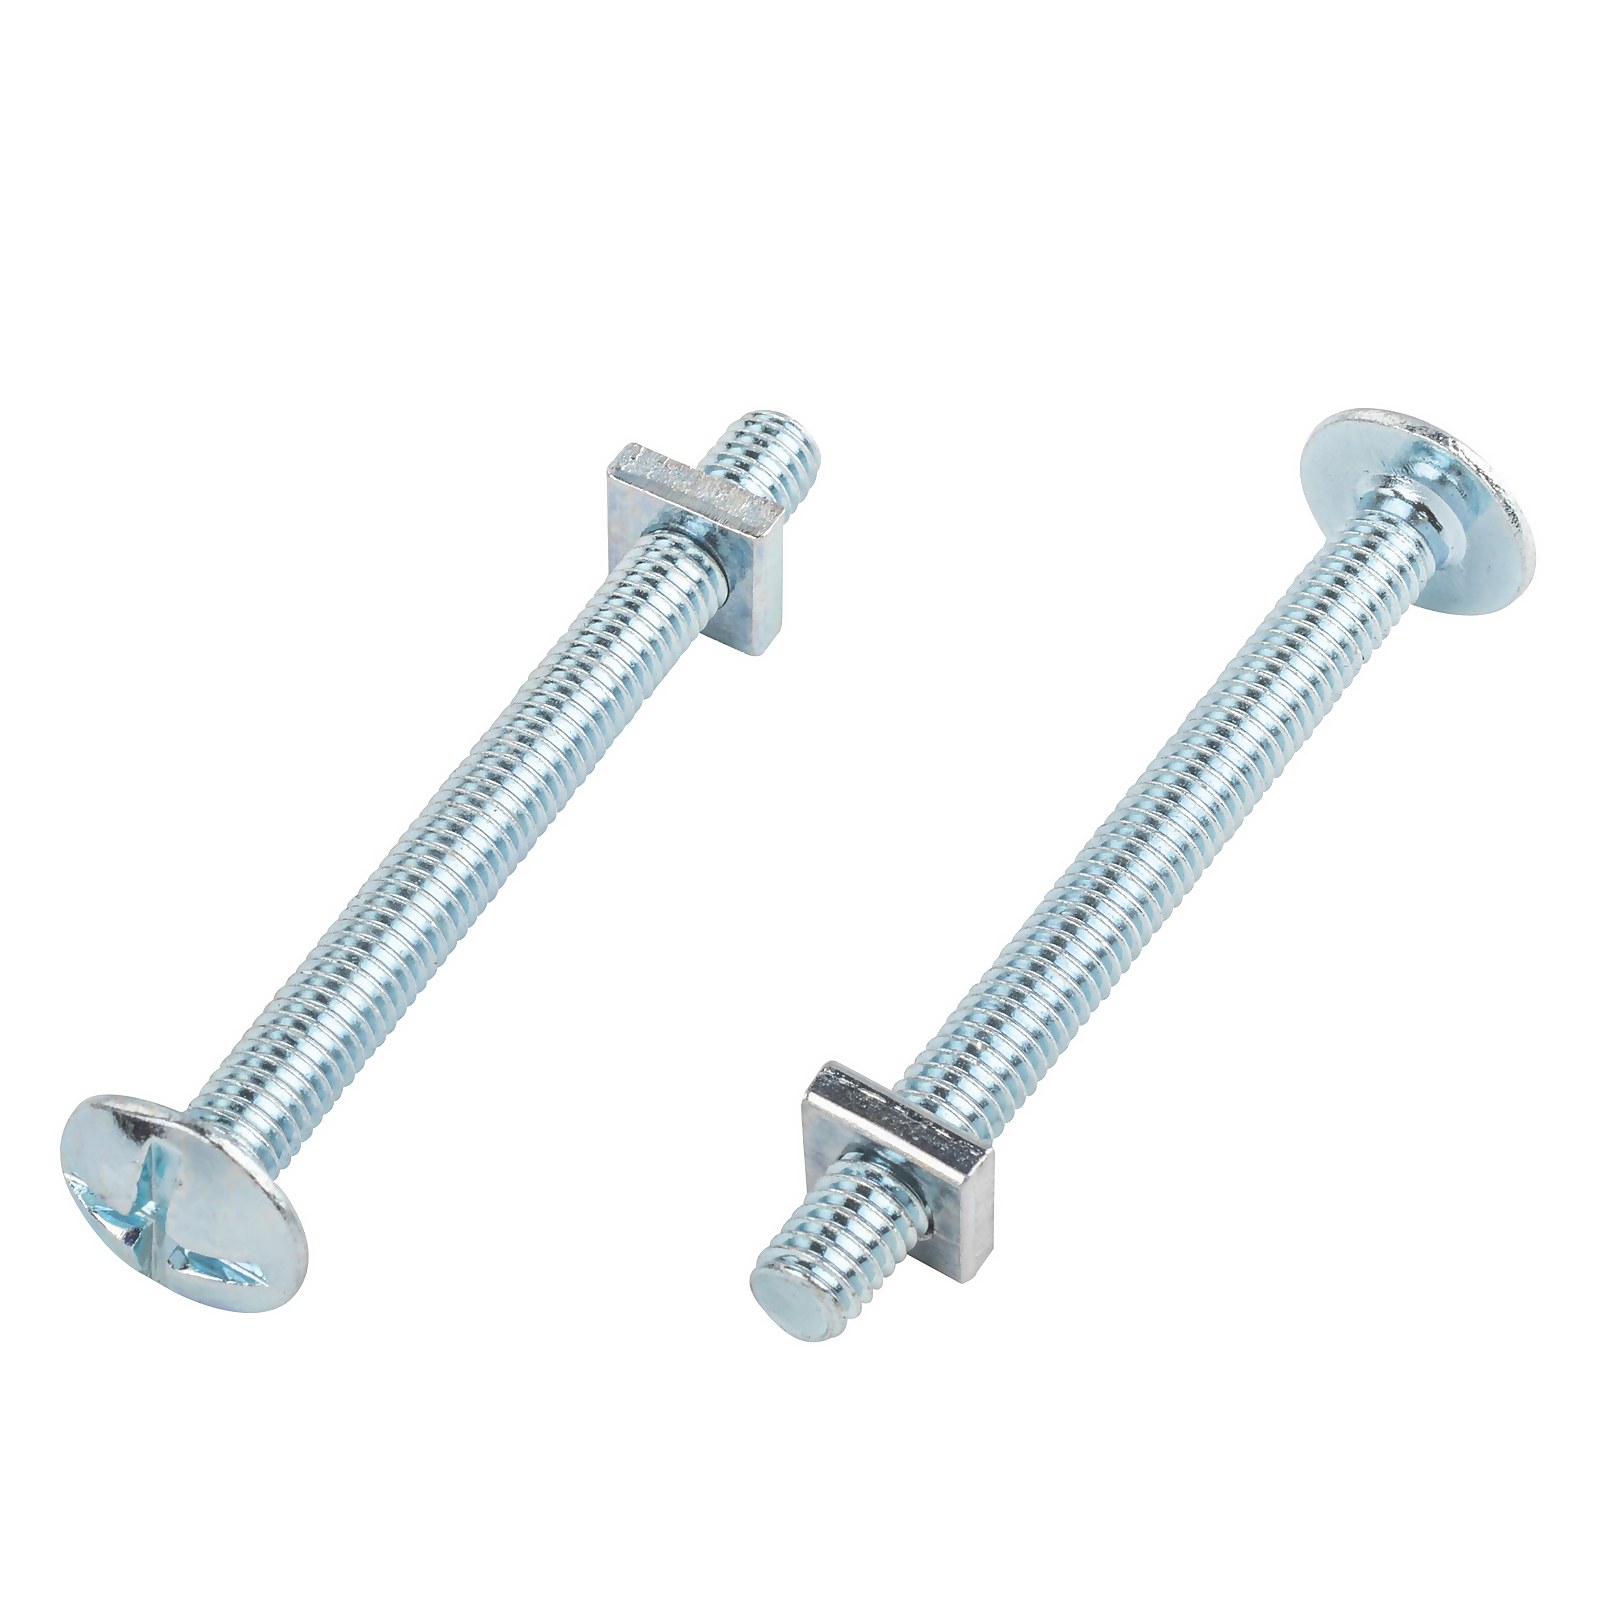 Photo of Homebase Zinc Plated Roof Bolt M6 60mm 5 Pack